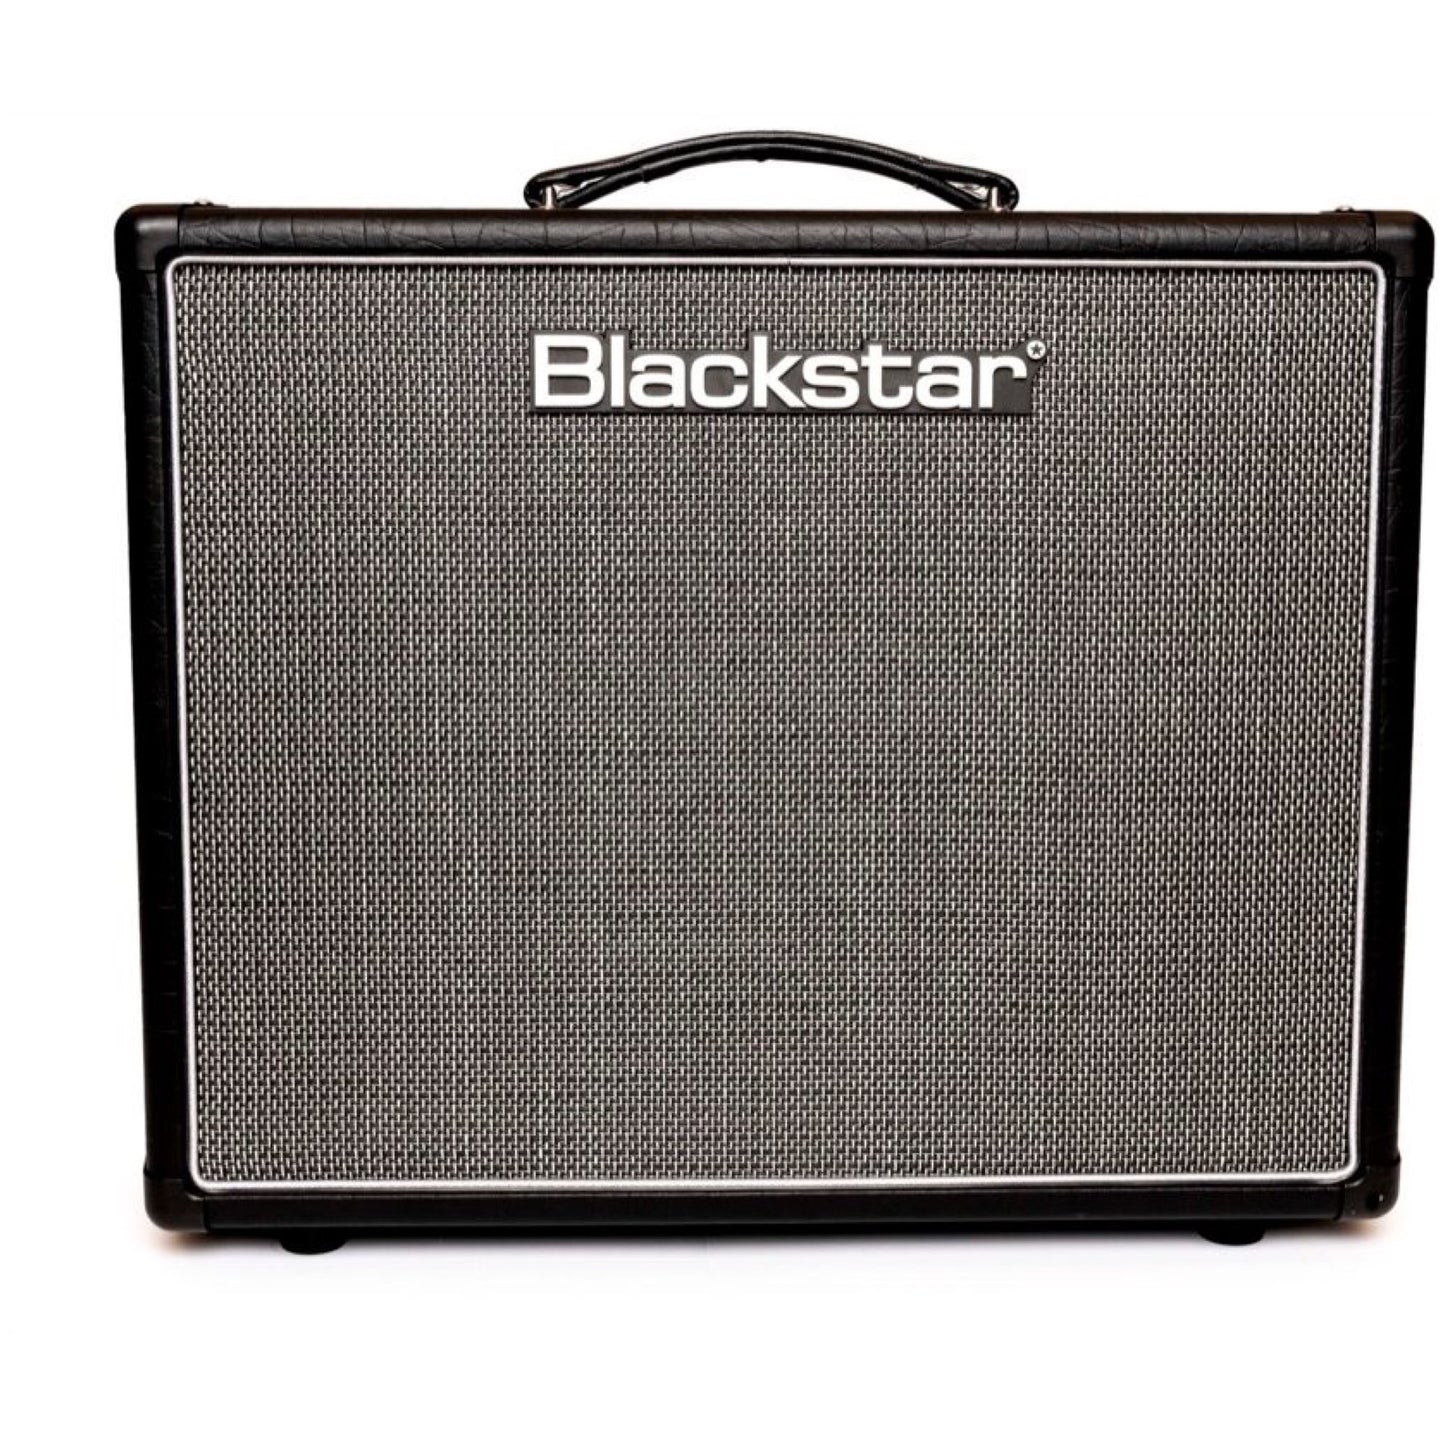 Blackstar HT20R MkII Guitar Combo Amplifier with Reverb (20 Watts, 1x12 Inch), Black